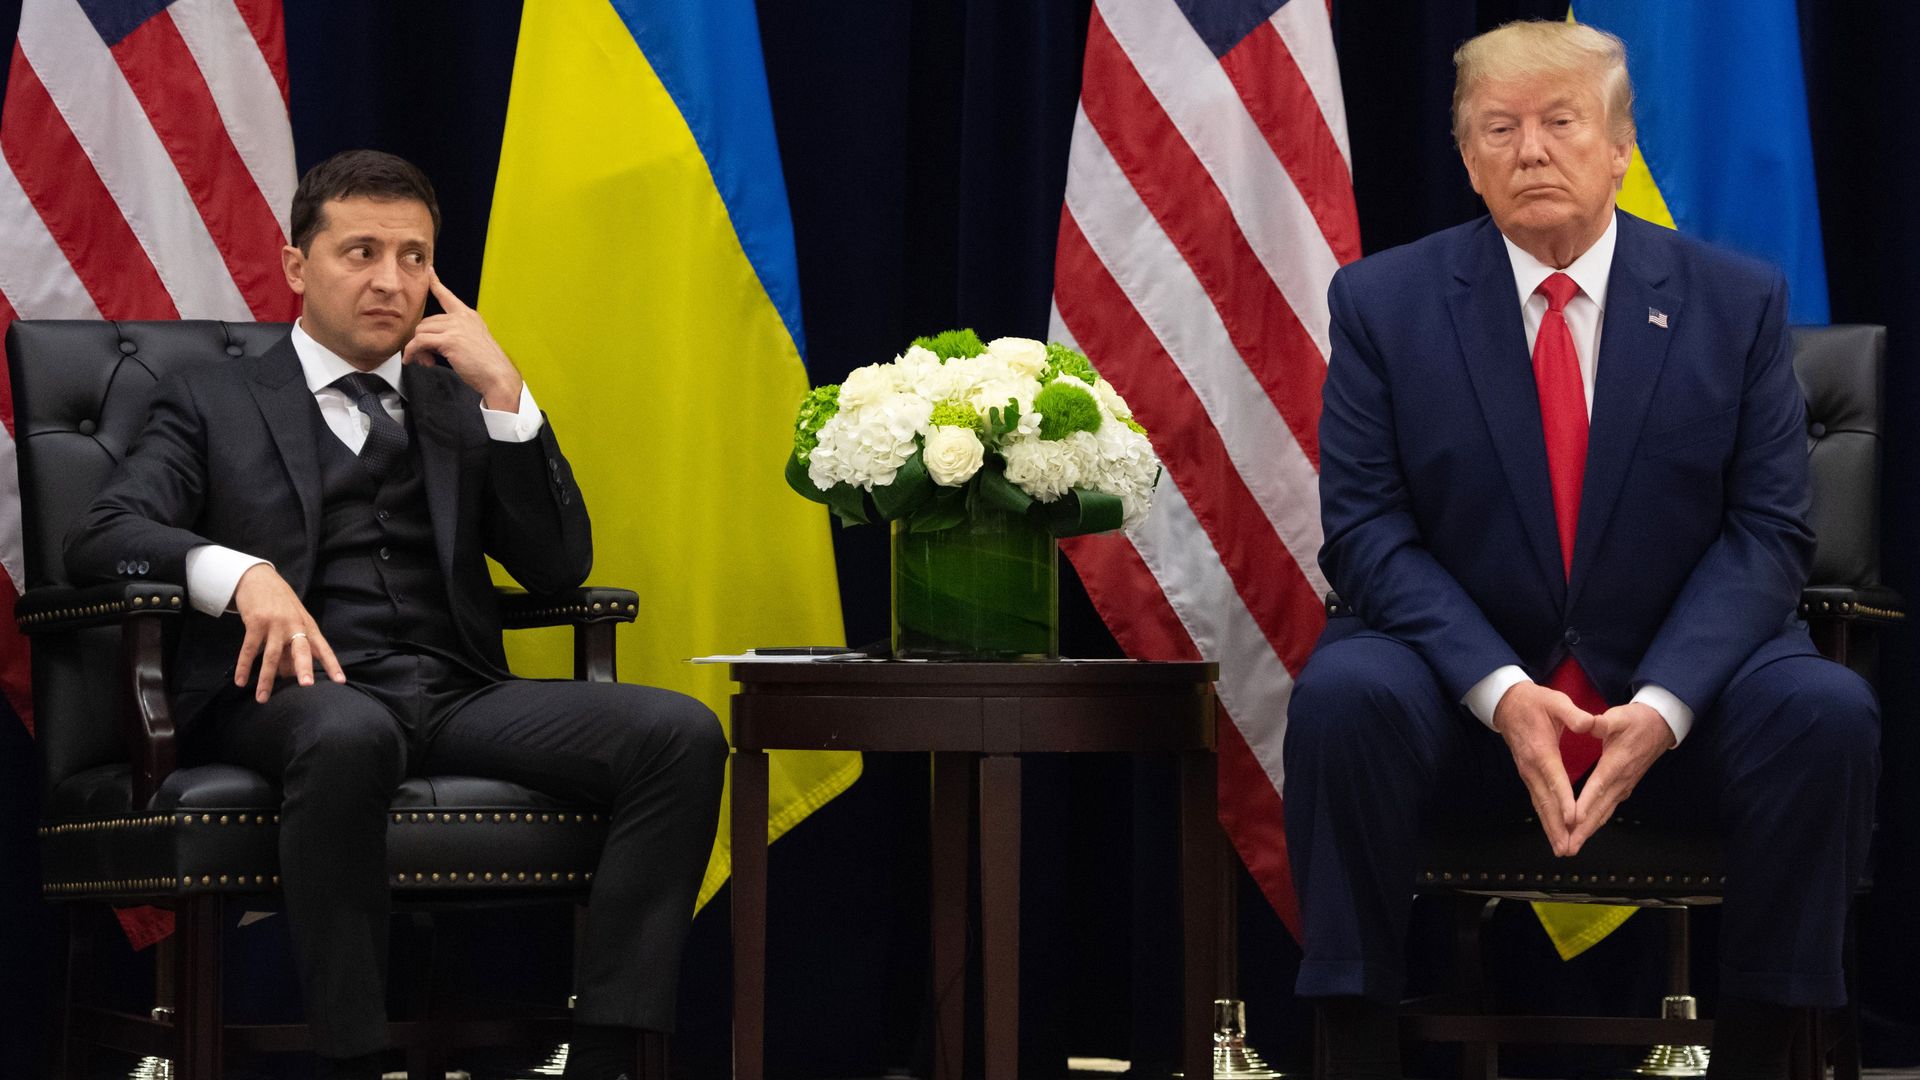 Donald Trump and Volodymyr Zelensky in adjacent chairs for press conference